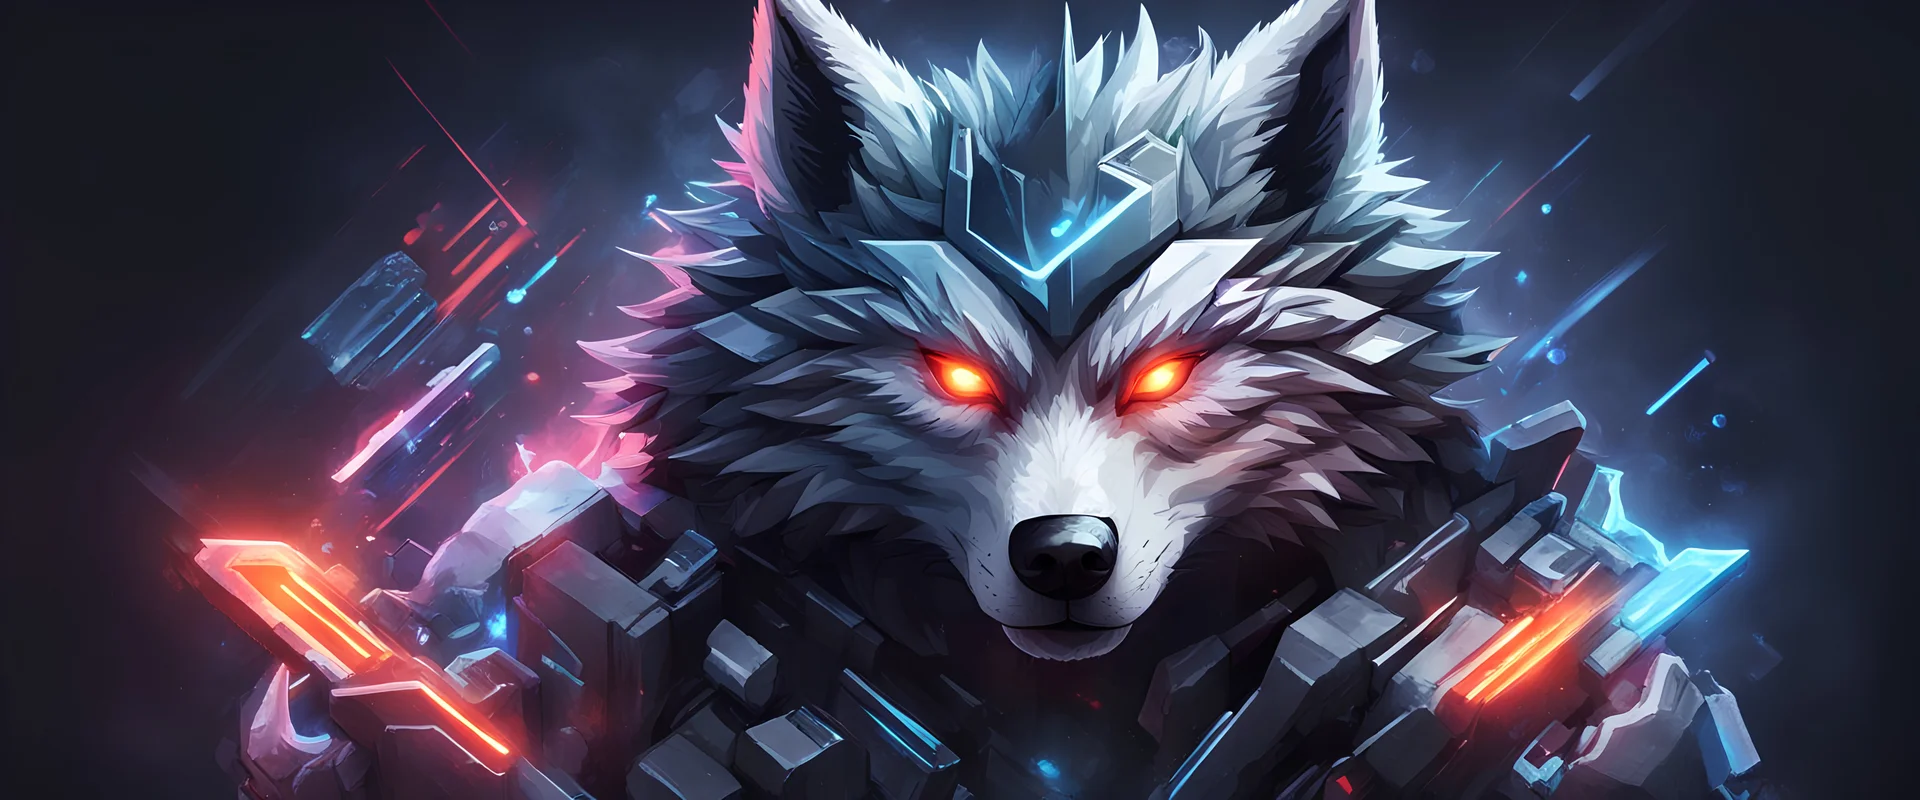 can you make me a banner picture for my YouTube channel named: "Gstsec" of Cyber Wolf with cyber elements because my channel is regarding cyber security?